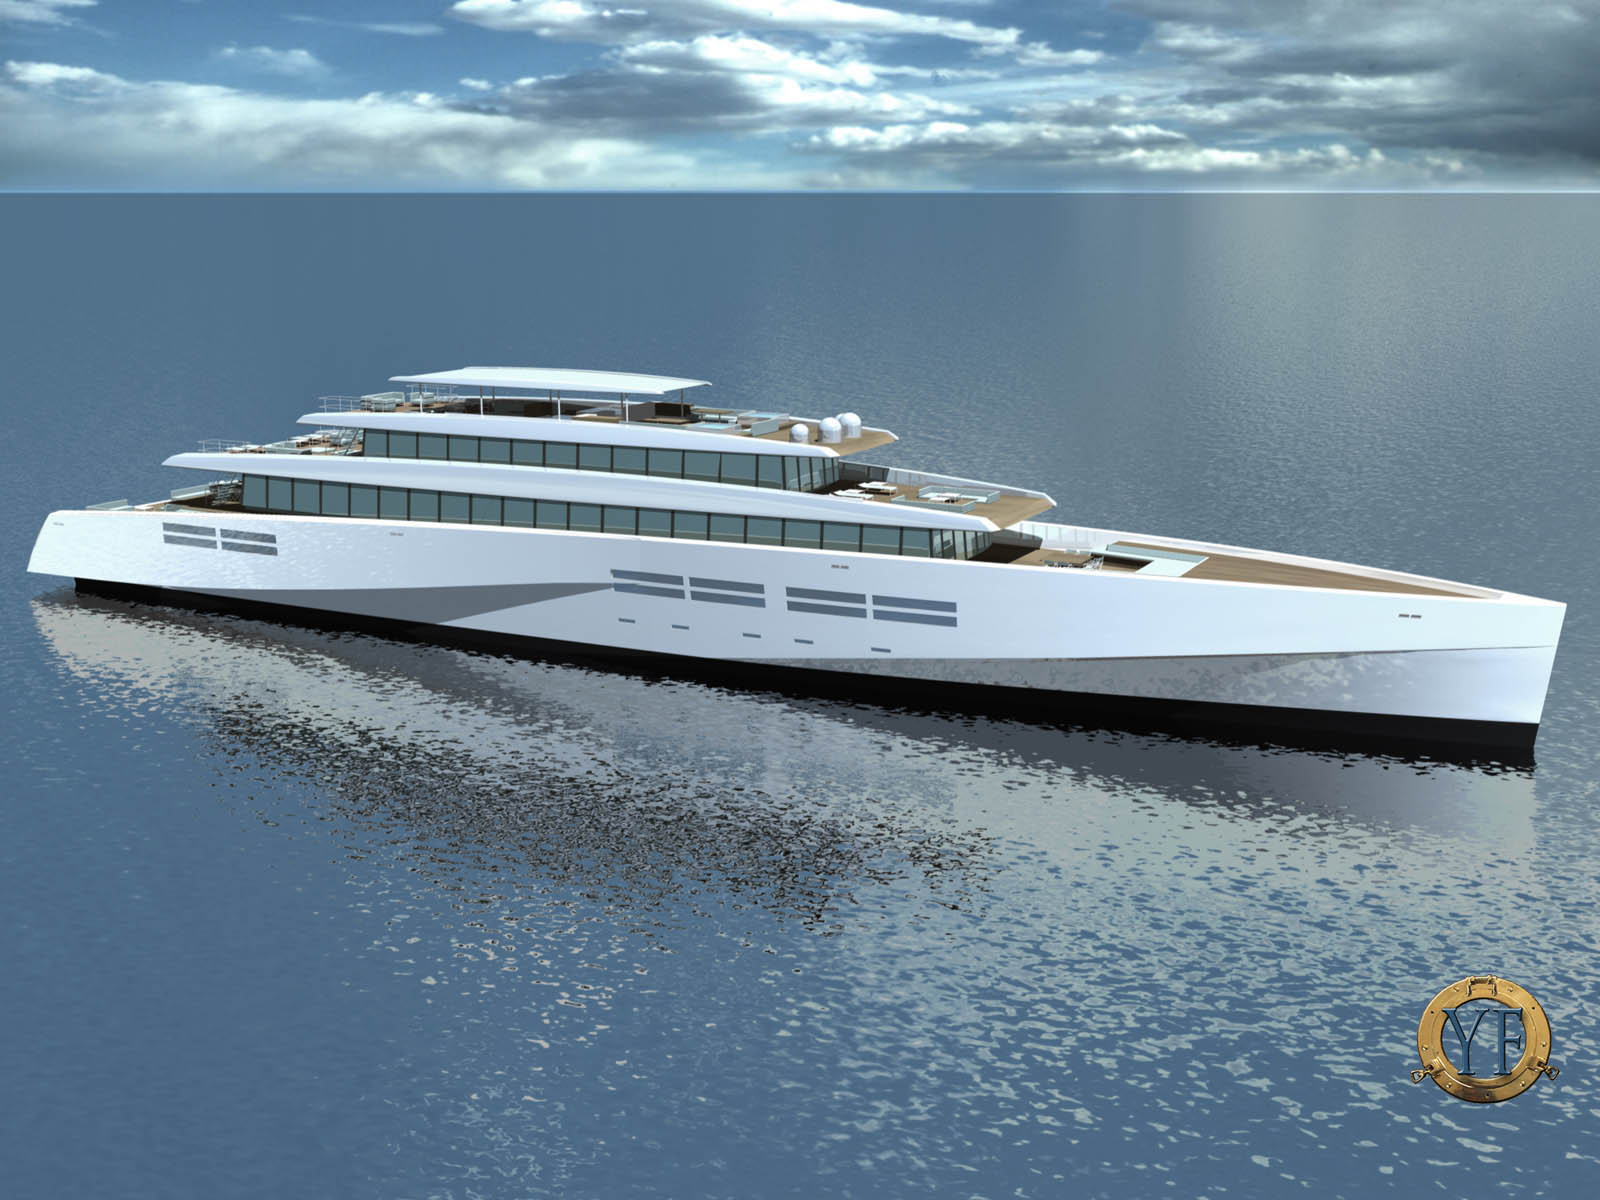 Wally Yacht Wallpaper Yacht. YachtForums: We Know Big Boats!